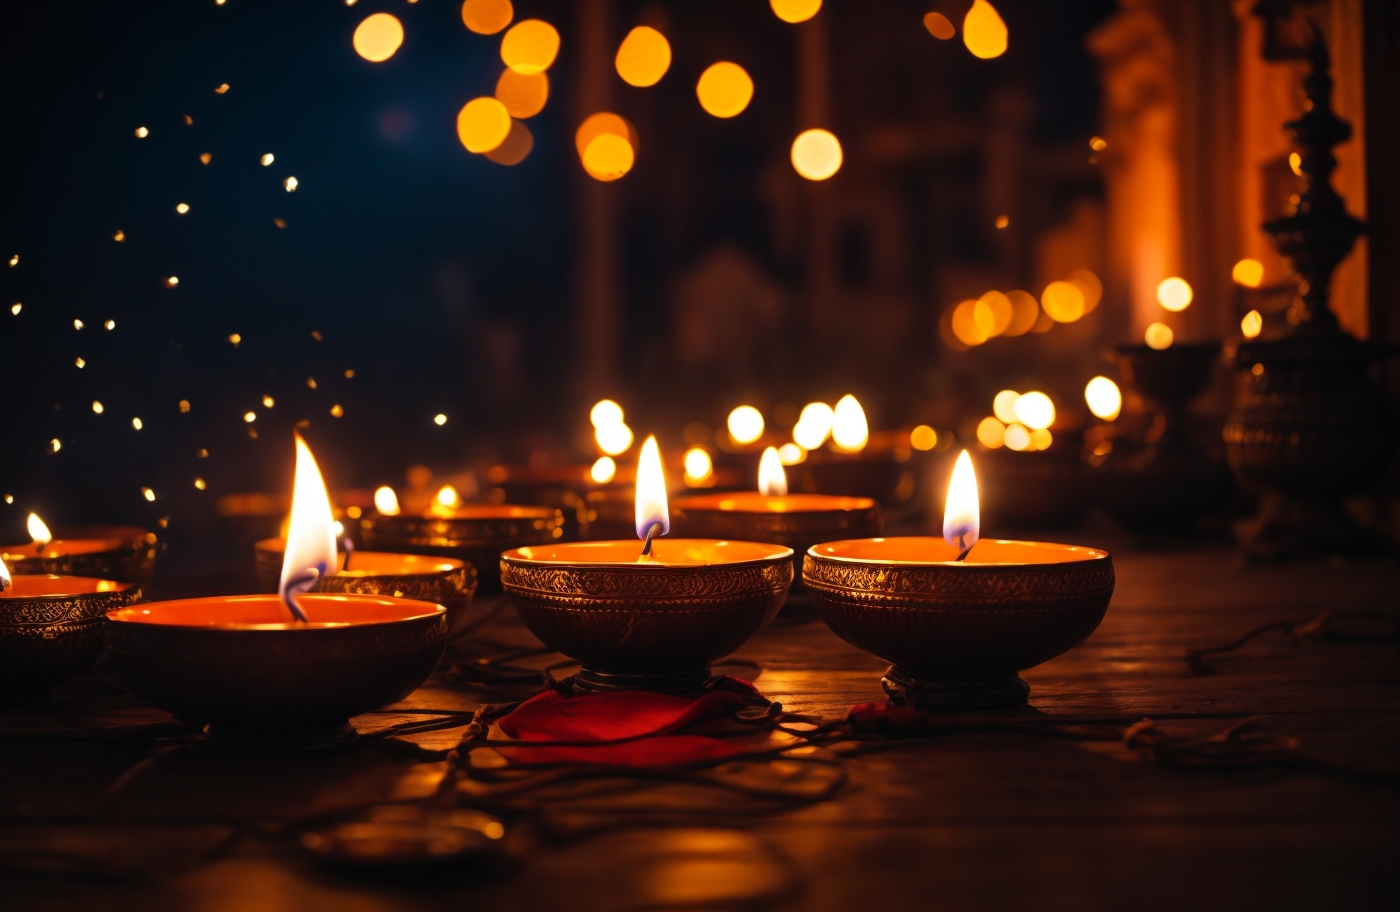 AI generated image of Deepavali or Diwali celebrations at Varanasi and Ayodhya in India, by lighting thousands of earthen lamps for Deepotsava at the river edge